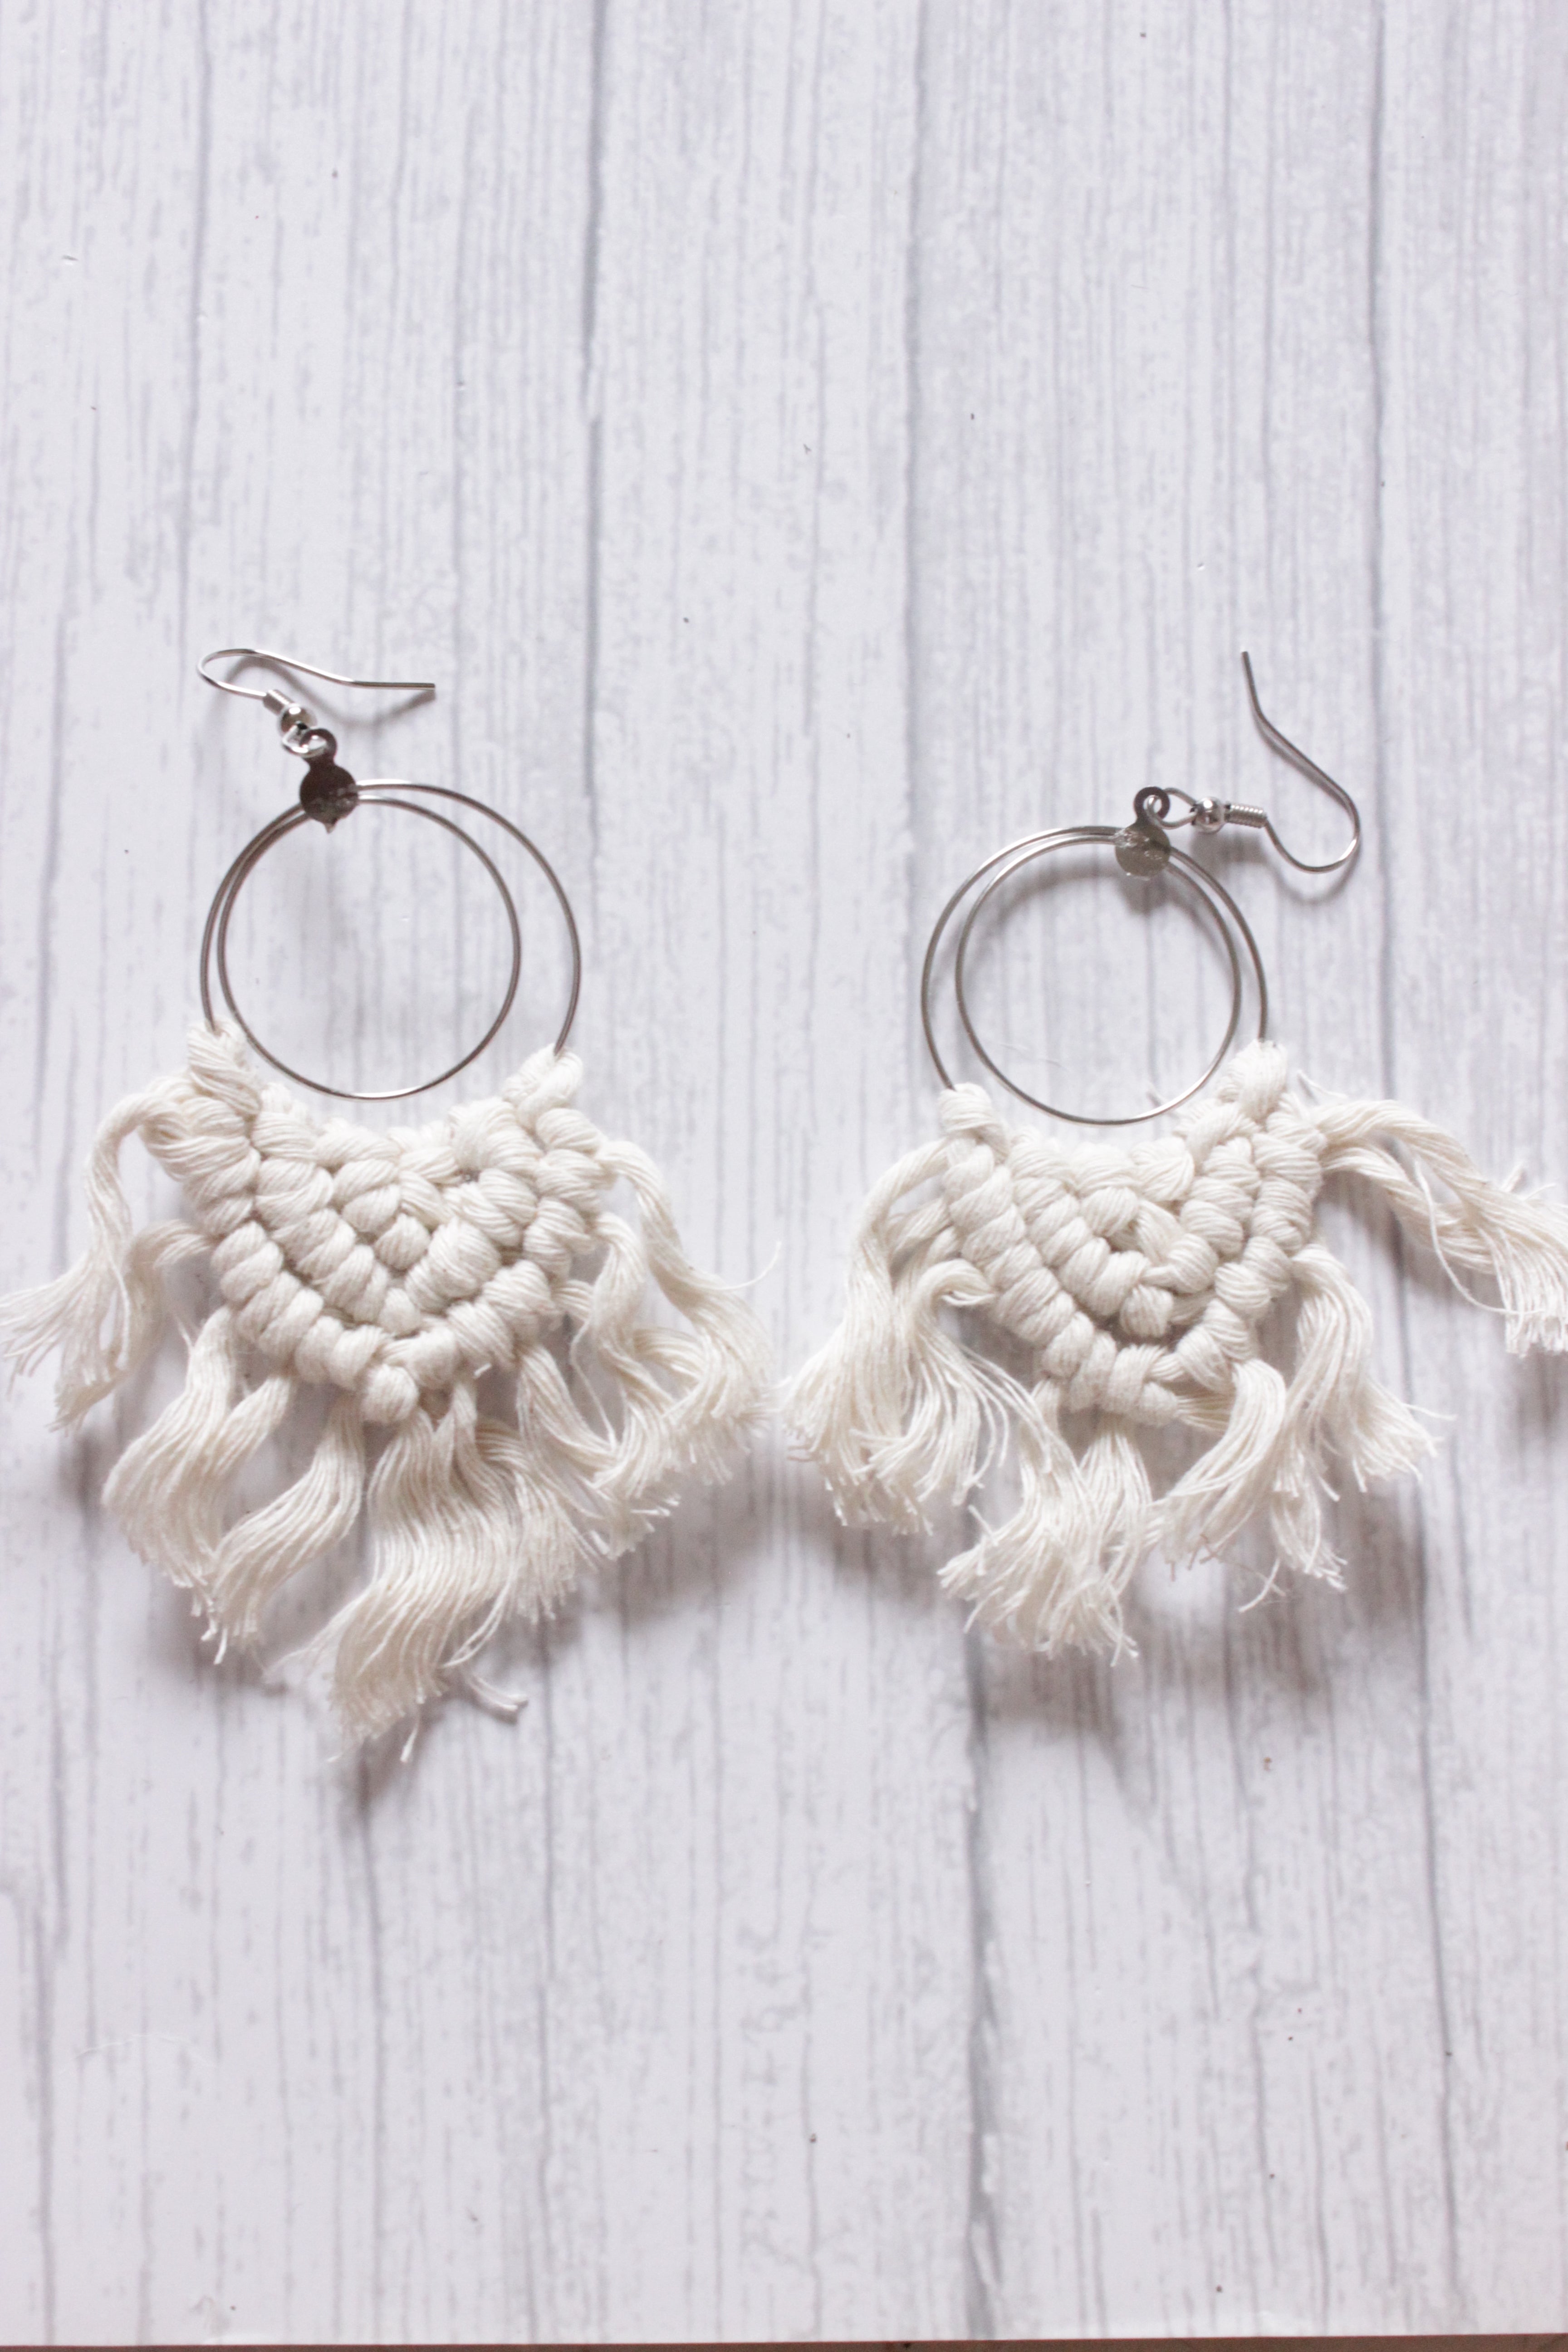 Concentric Circles Hand Braided White Macrame Threads Dangler Earrings